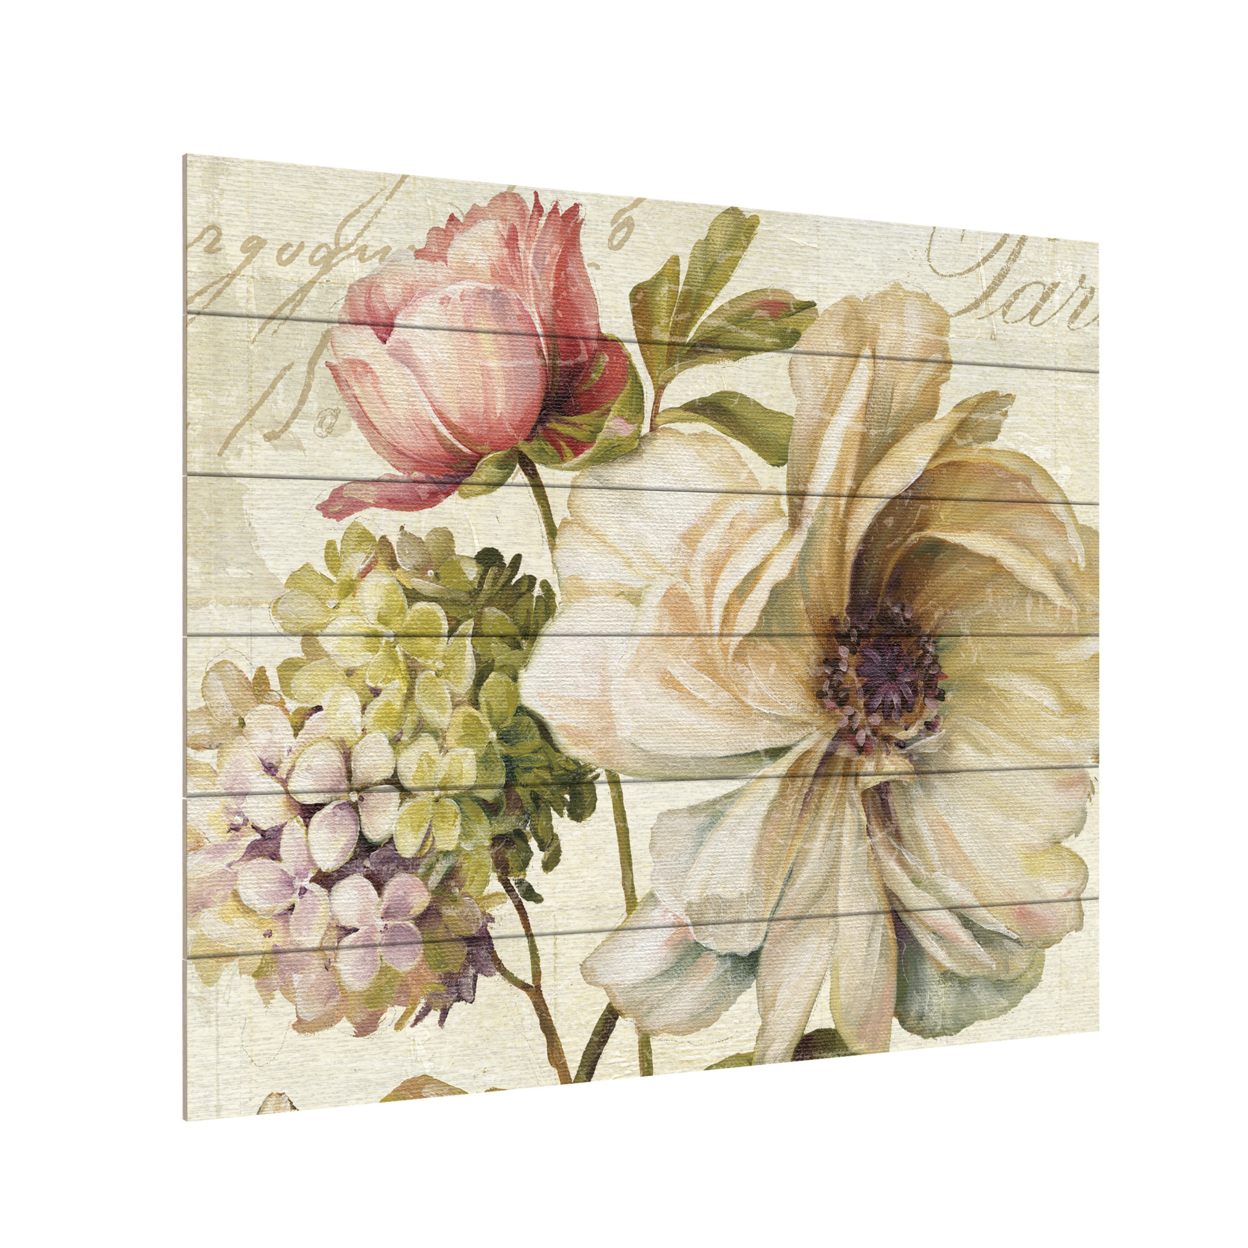 Wooden Slat Art 18 X 22 Inches Titled Marche De Fleurs II Ready To Hang Home Decor Picture